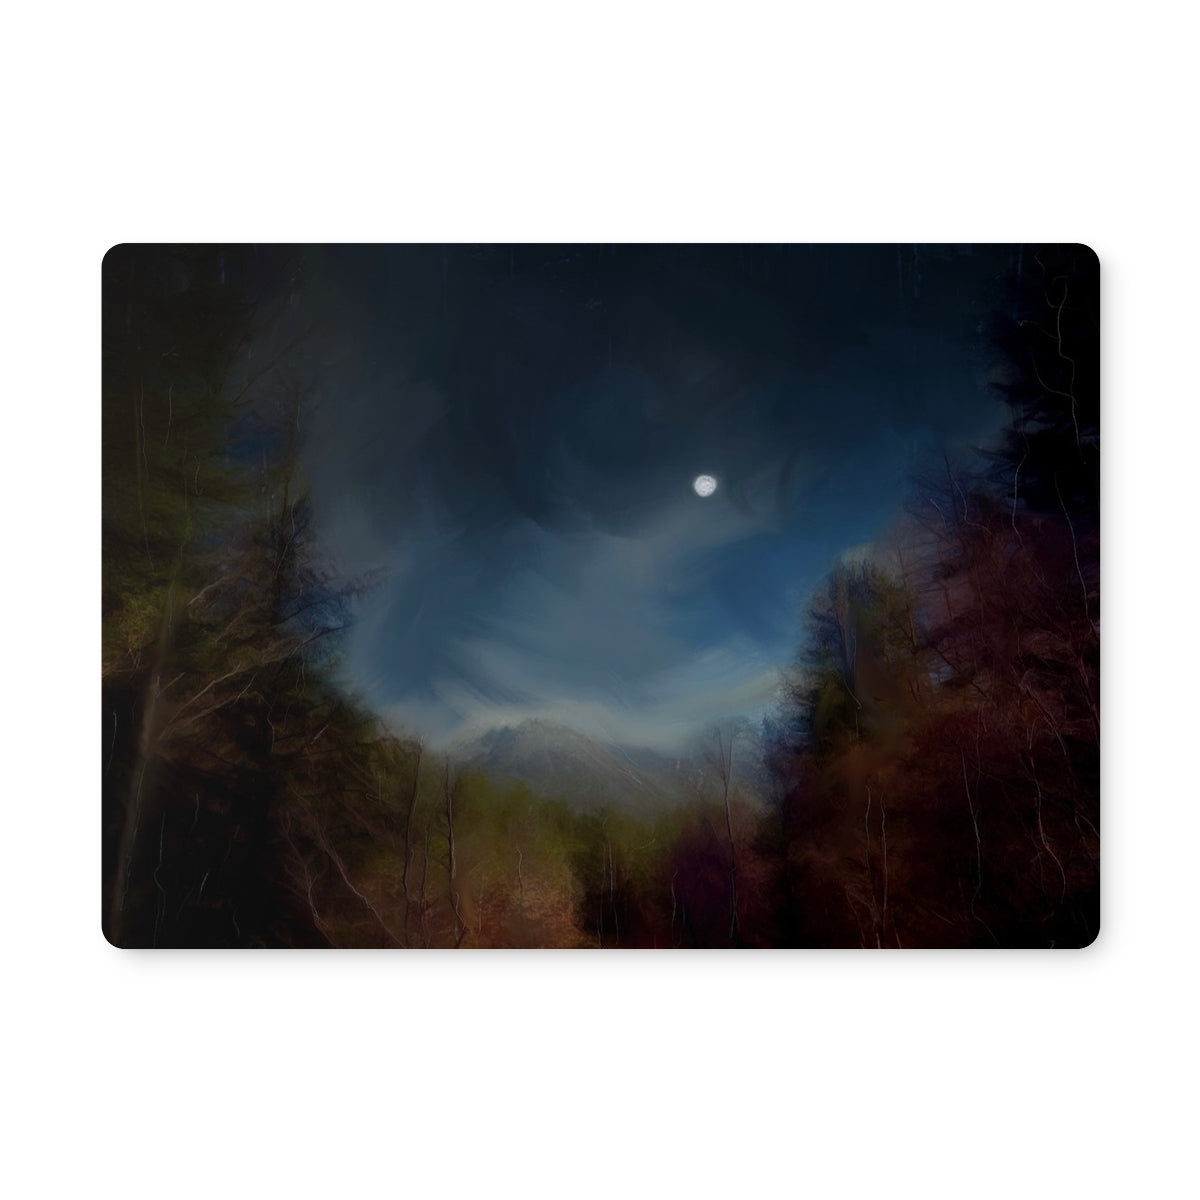 Glencoe Lochan Moonlight Art Gifts Placemat-Placemats-Scottish Lochs & Mountains Art Gallery-2 Placemats-Paintings, Prints, Homeware, Art Gifts From Scotland By Scottish Artist Kevin Hunter